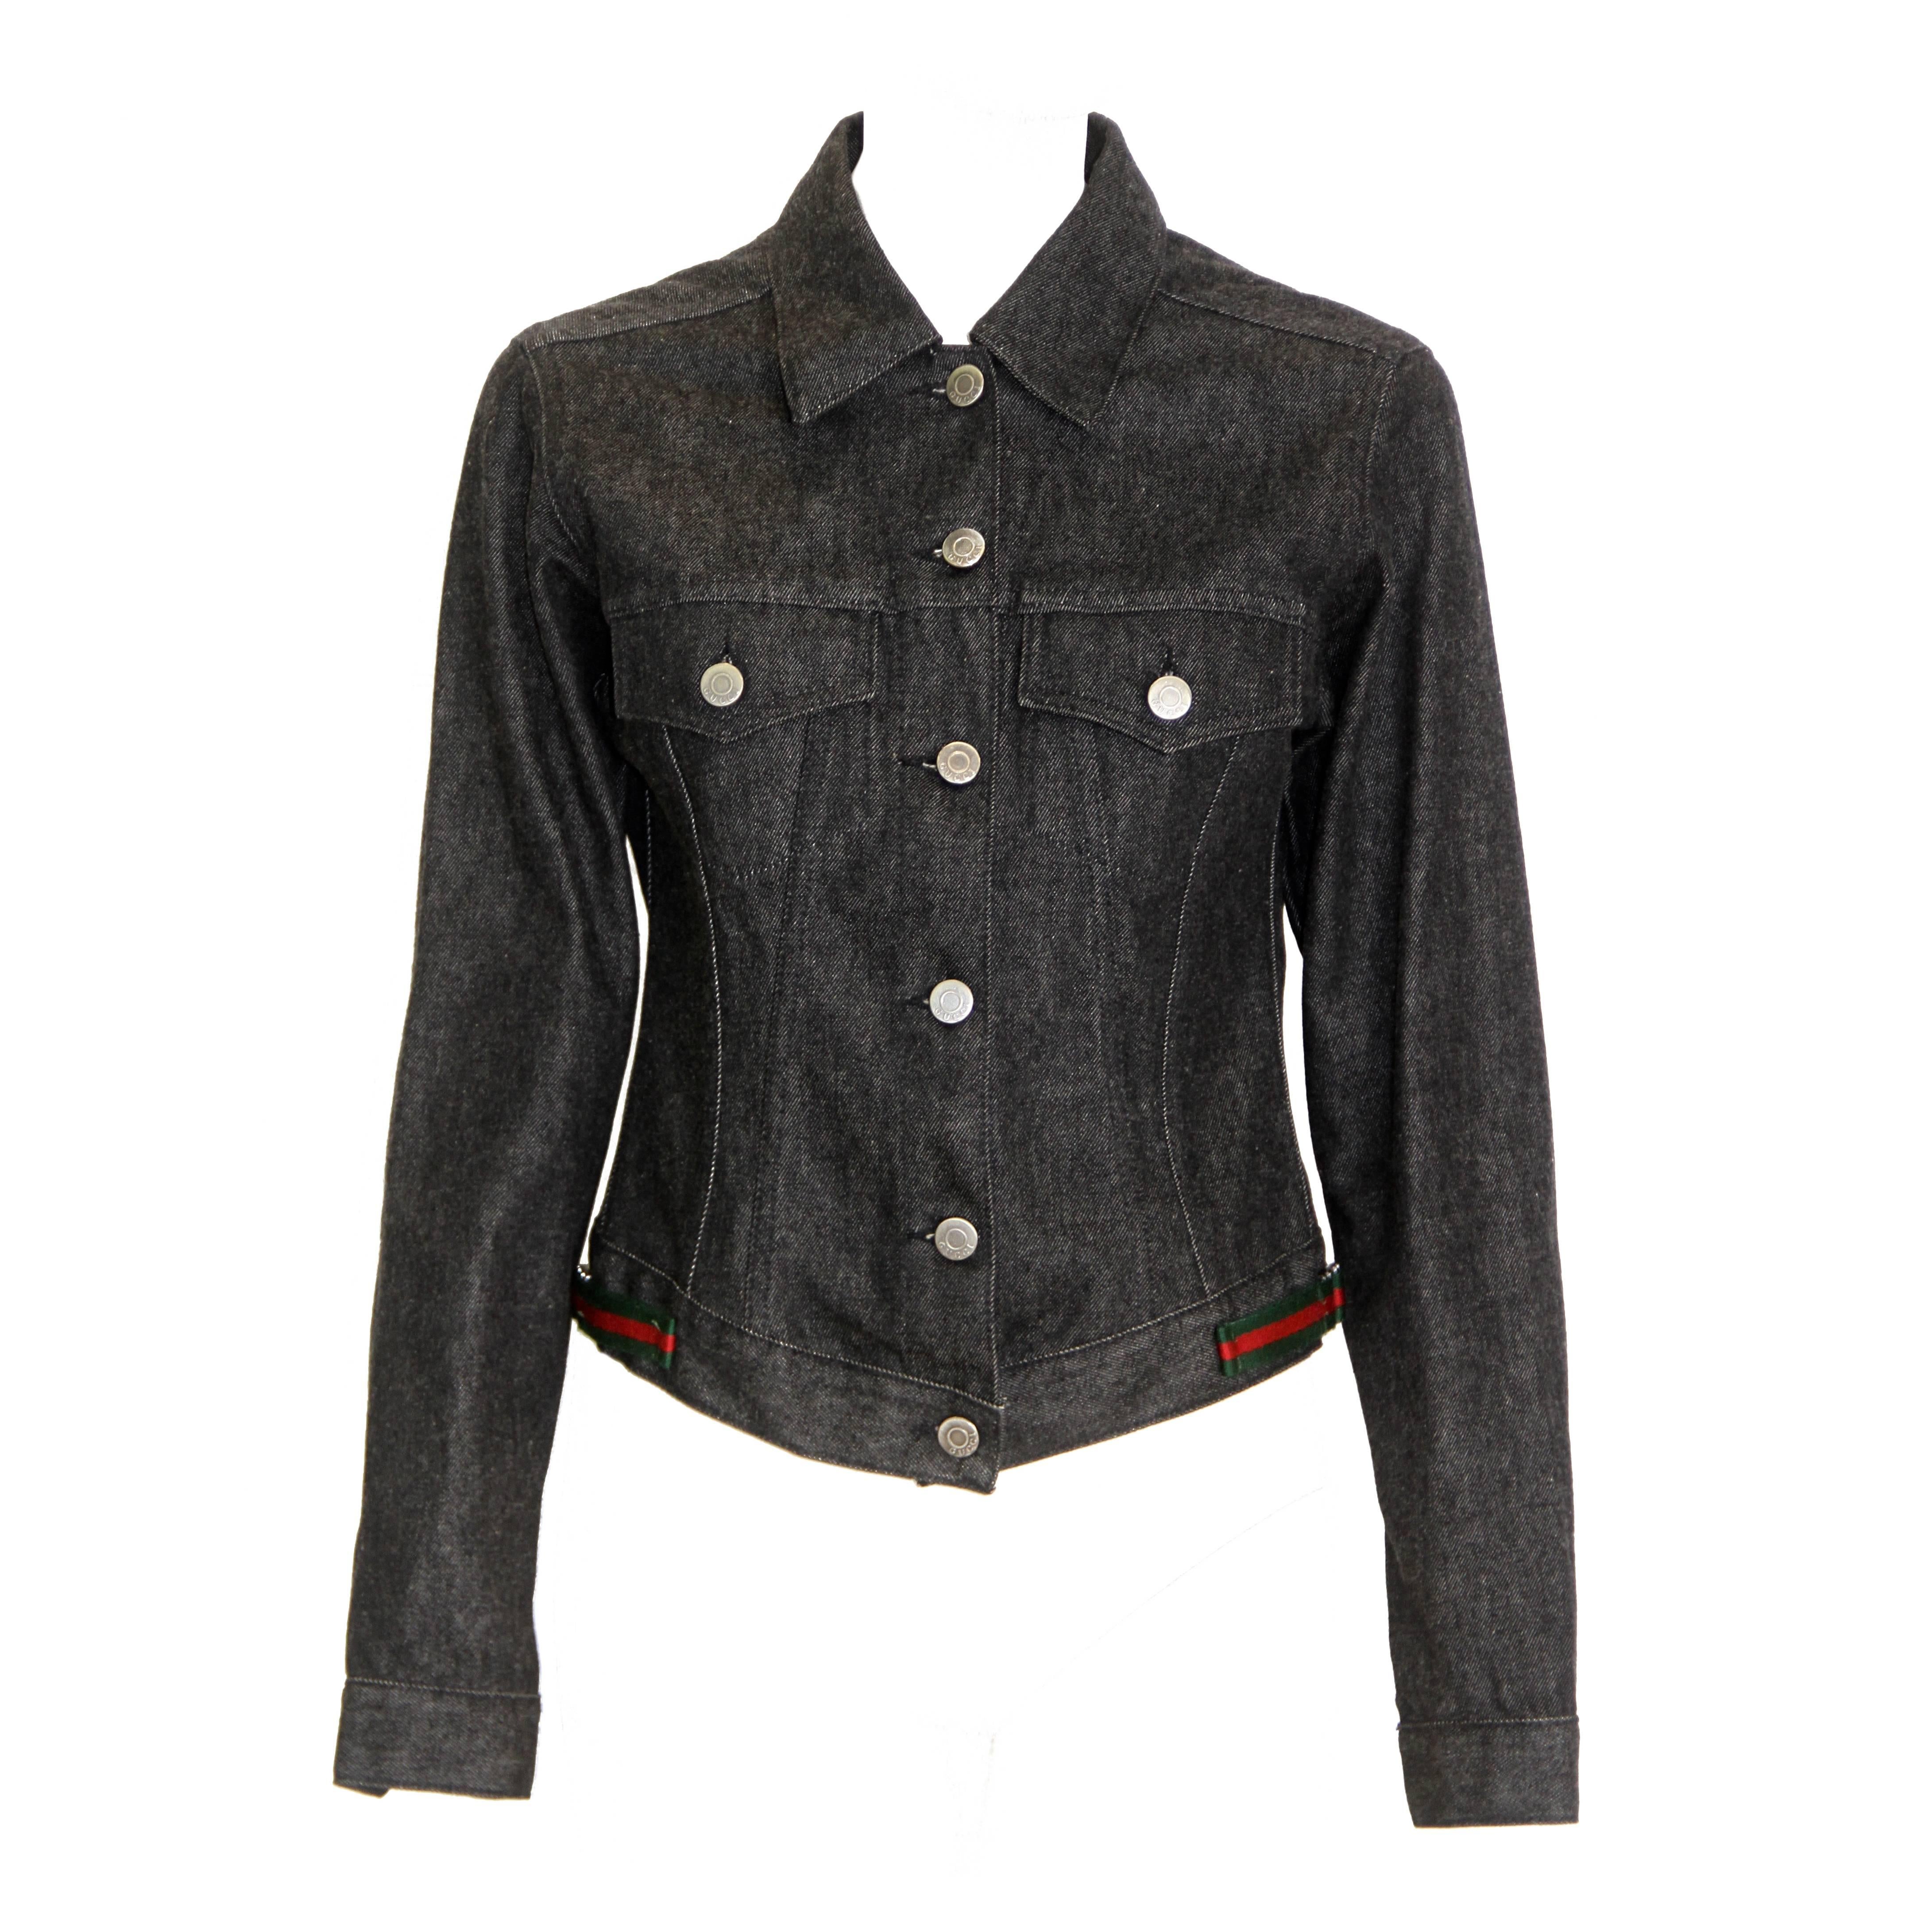 Tom Ford For Gucci Fitted Denim Jacket 1998 For Sale